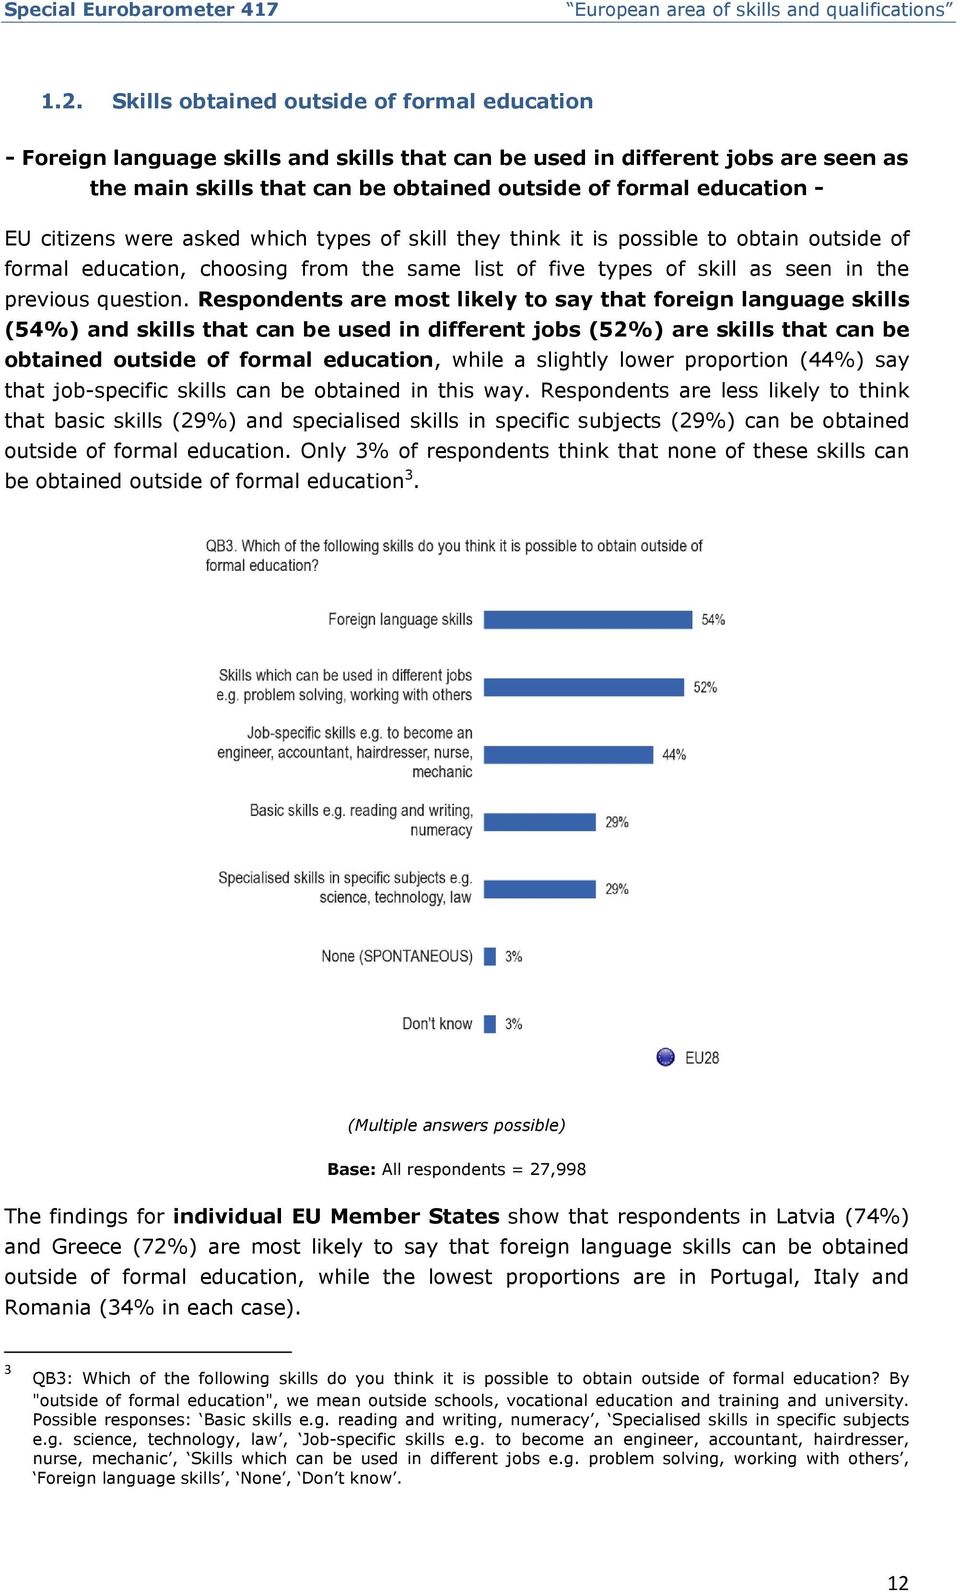 Respondents are most likely to say that foreign language skills (54%) and skills that can be used in different jobs (52%) are skills that can be obtained outside of formal education, while a slightly